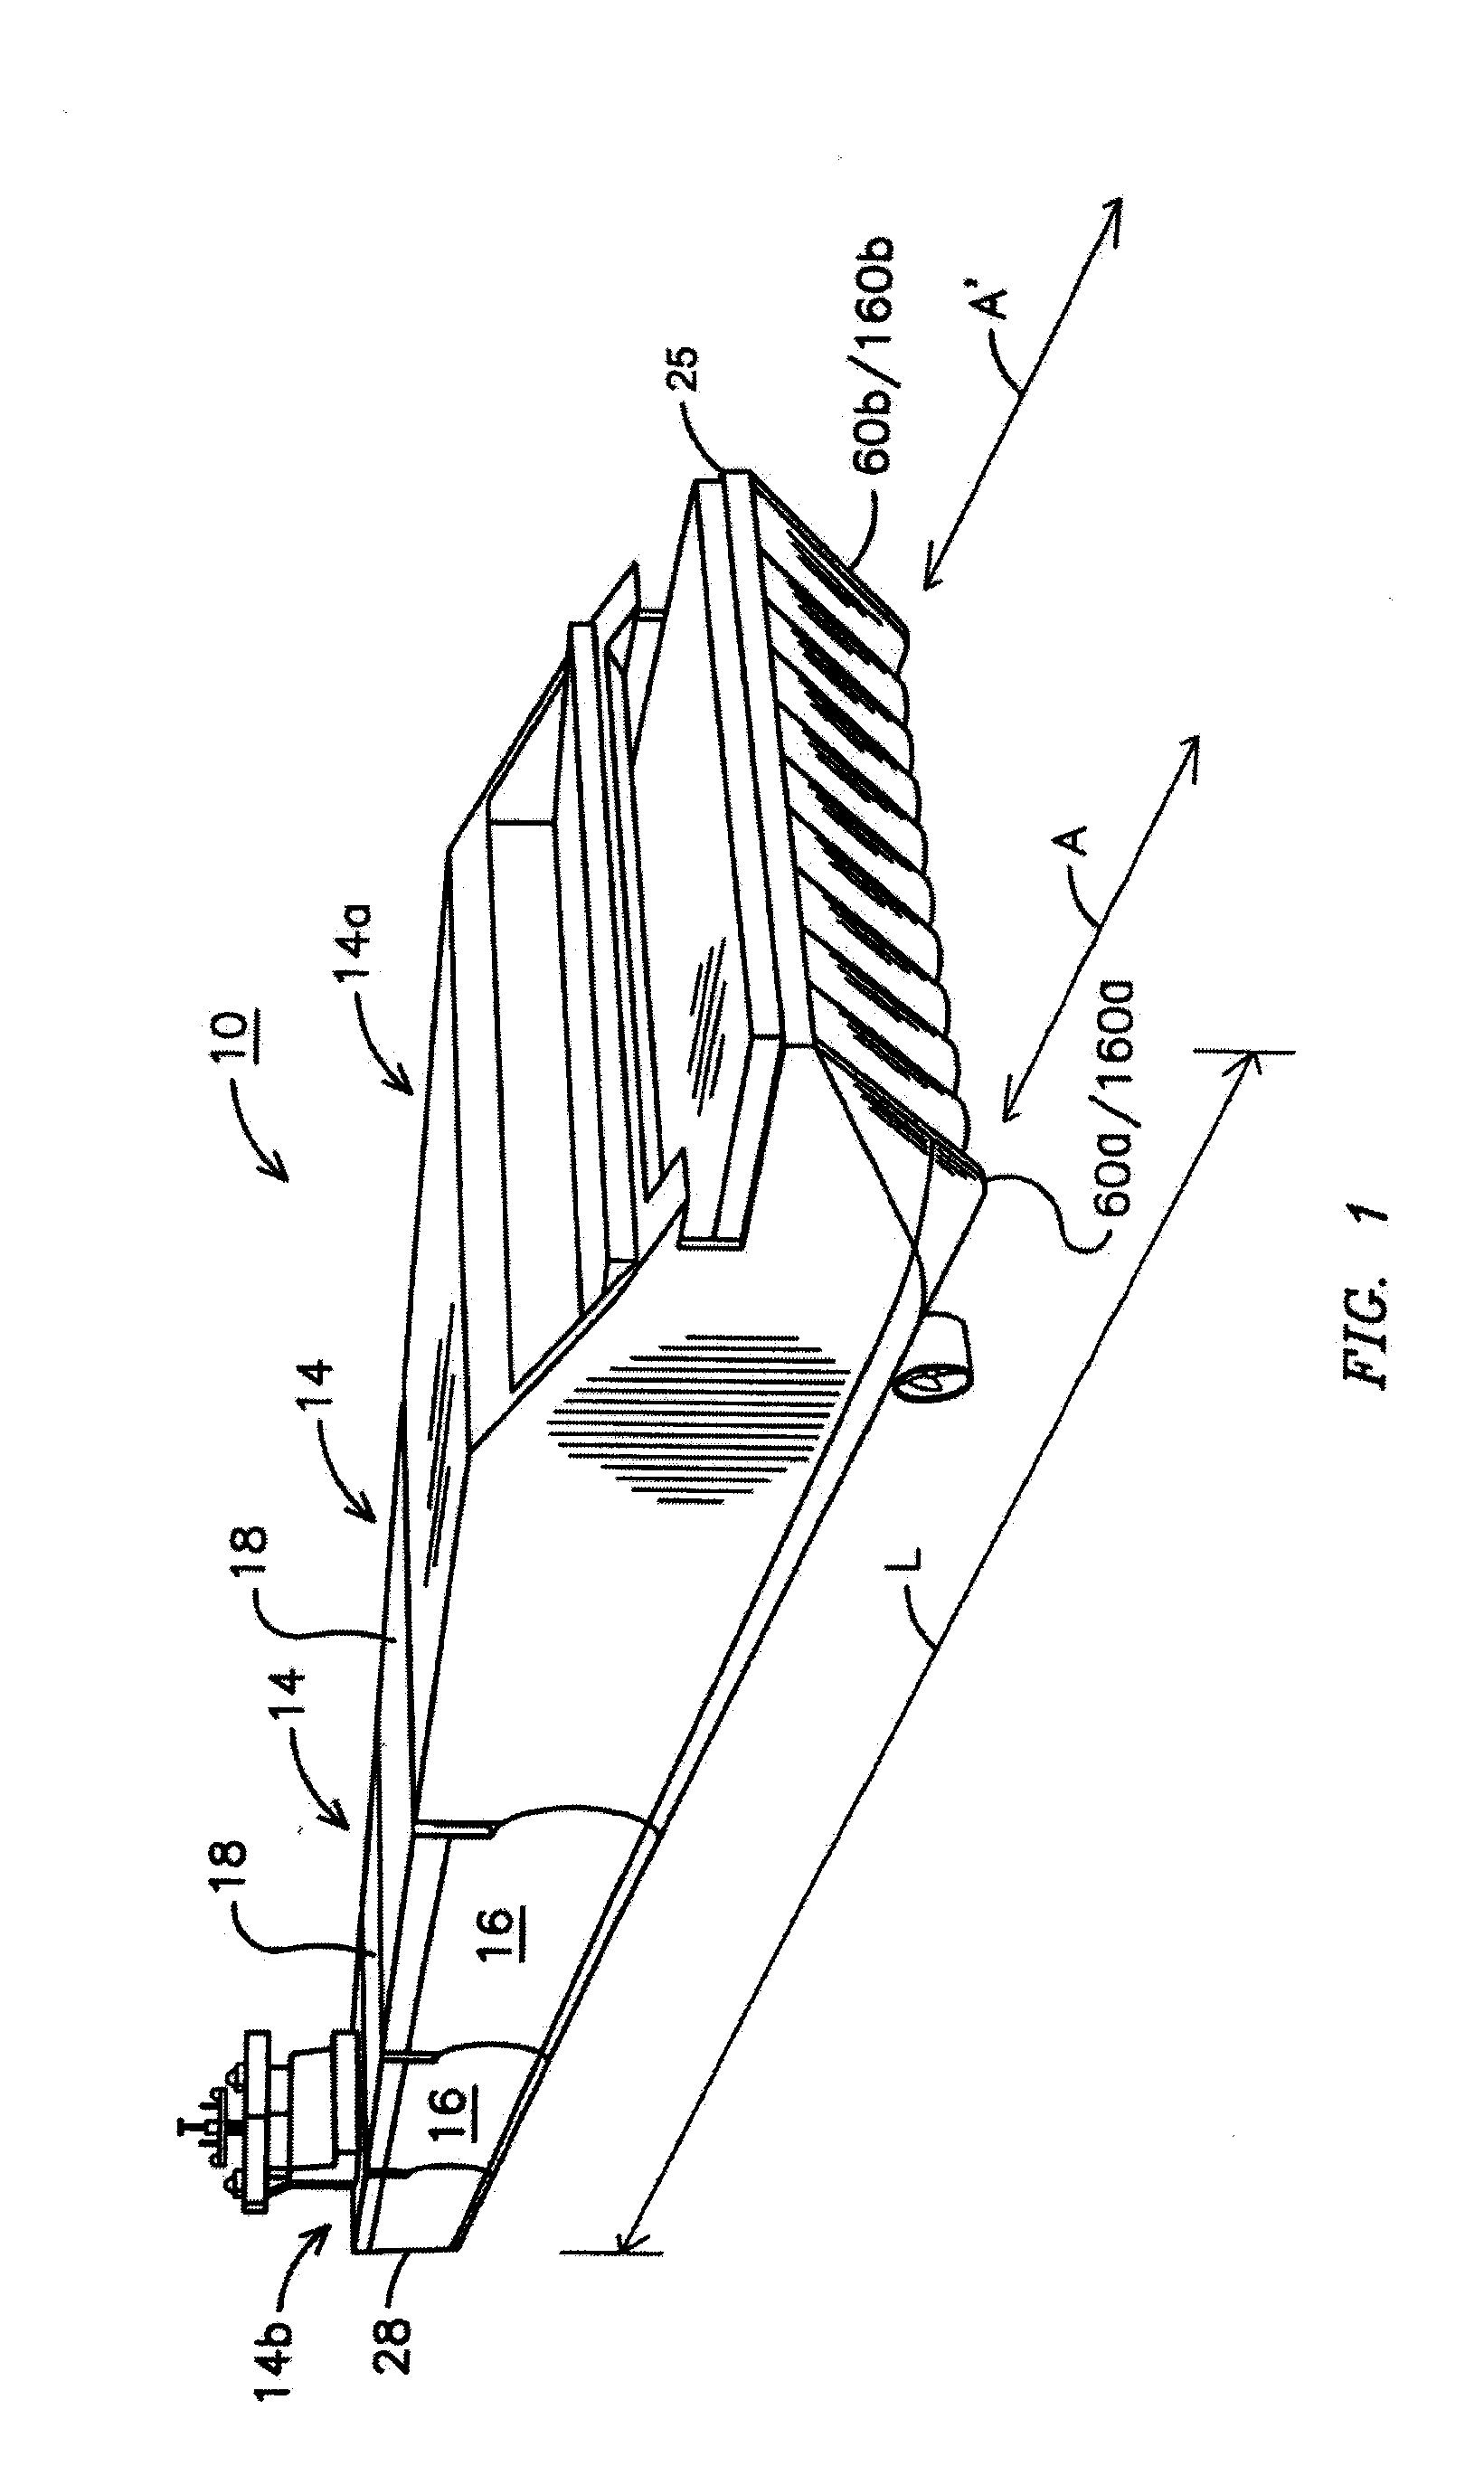 Ship and associated methods of formation with vessels connectable between decks and hulls